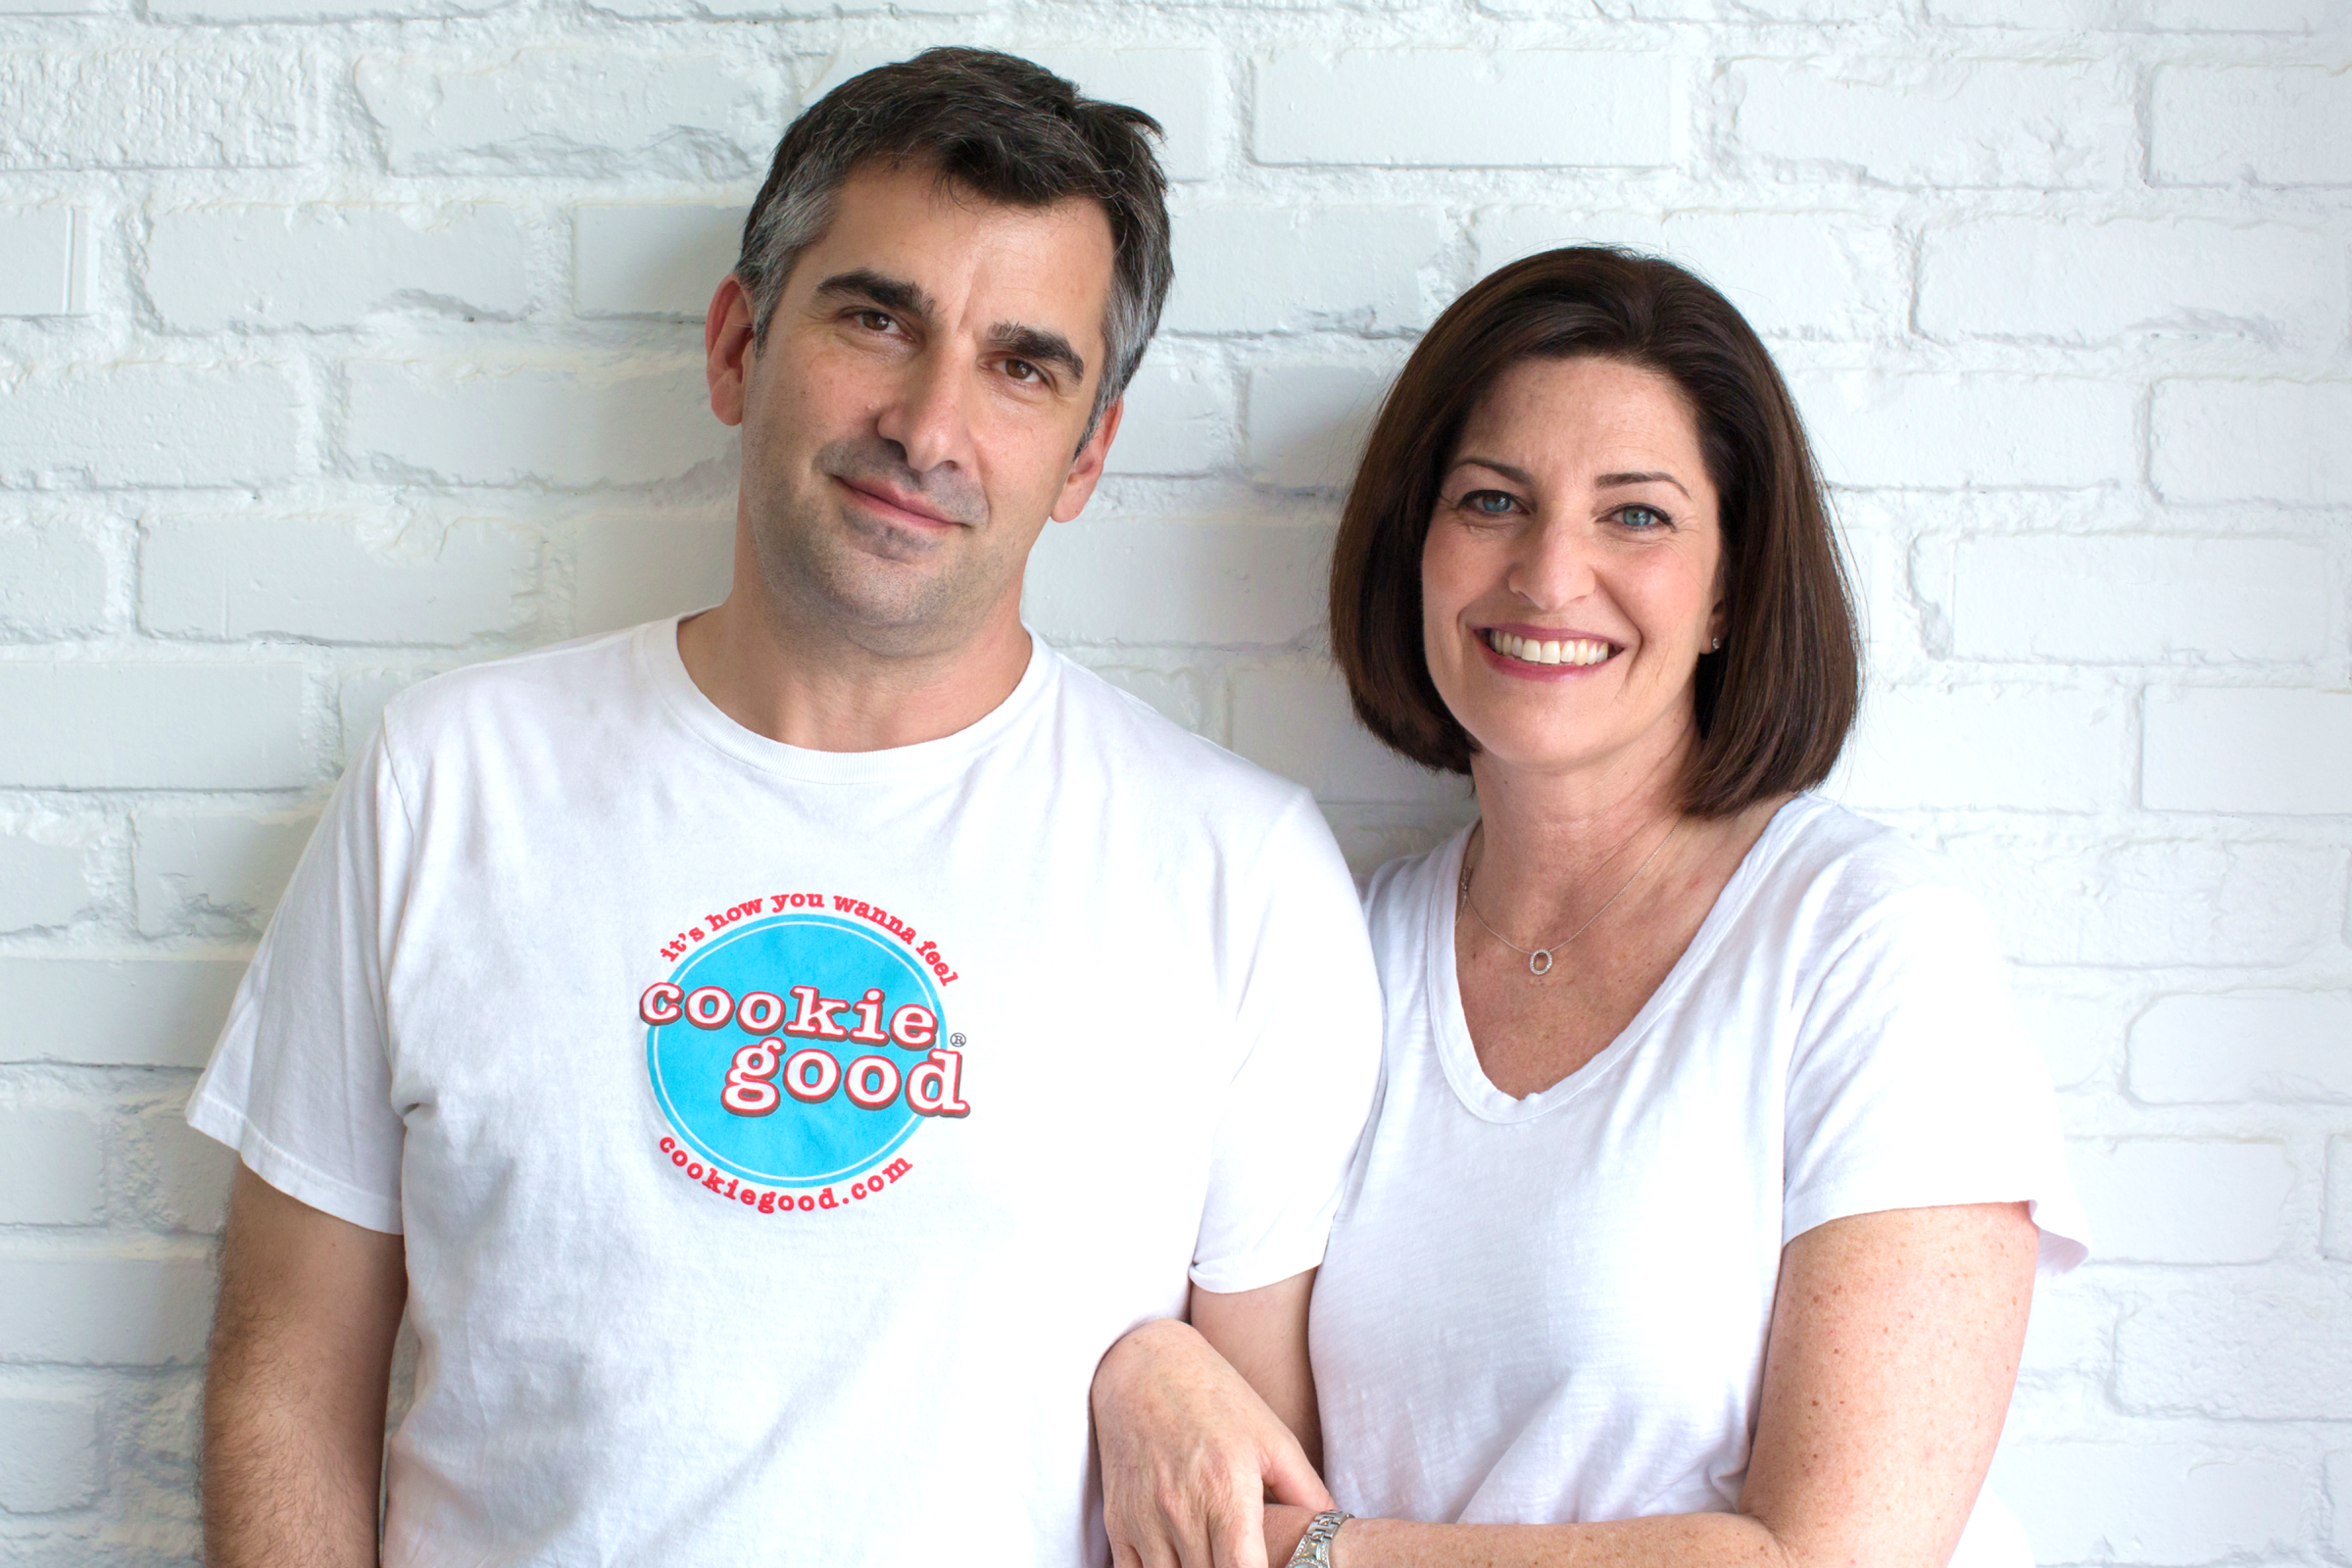 Ross and Melanie Canter, founders of Cookie Good.